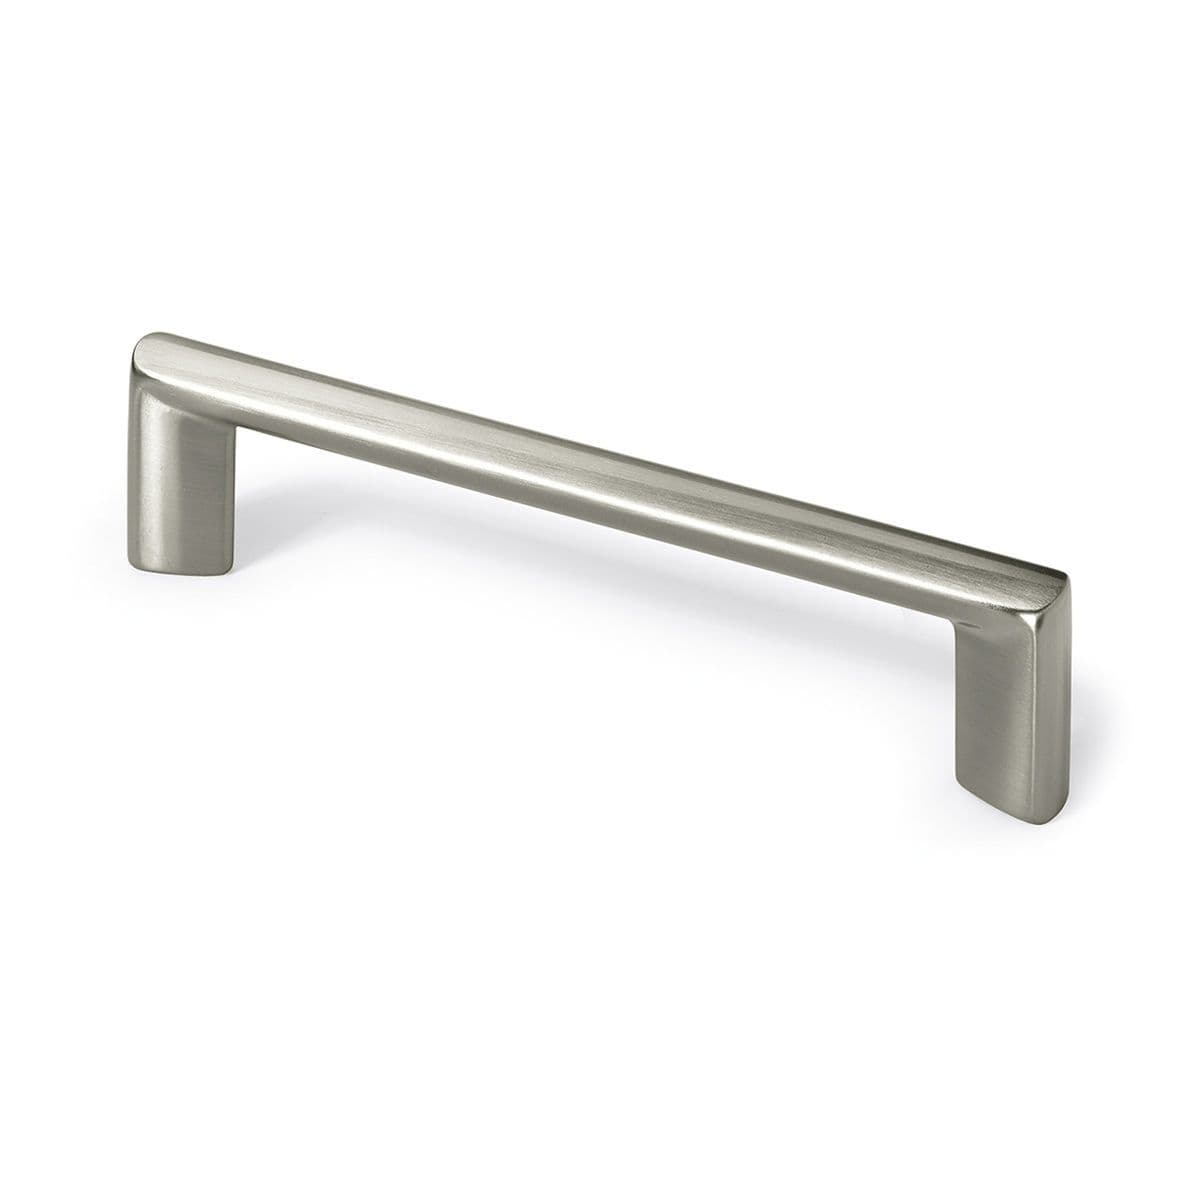 CHALCIS D Cupboard Handle - 2 sizes - BRUSHED STAINLESS STEEL LOOK (HETTICH - Organic)